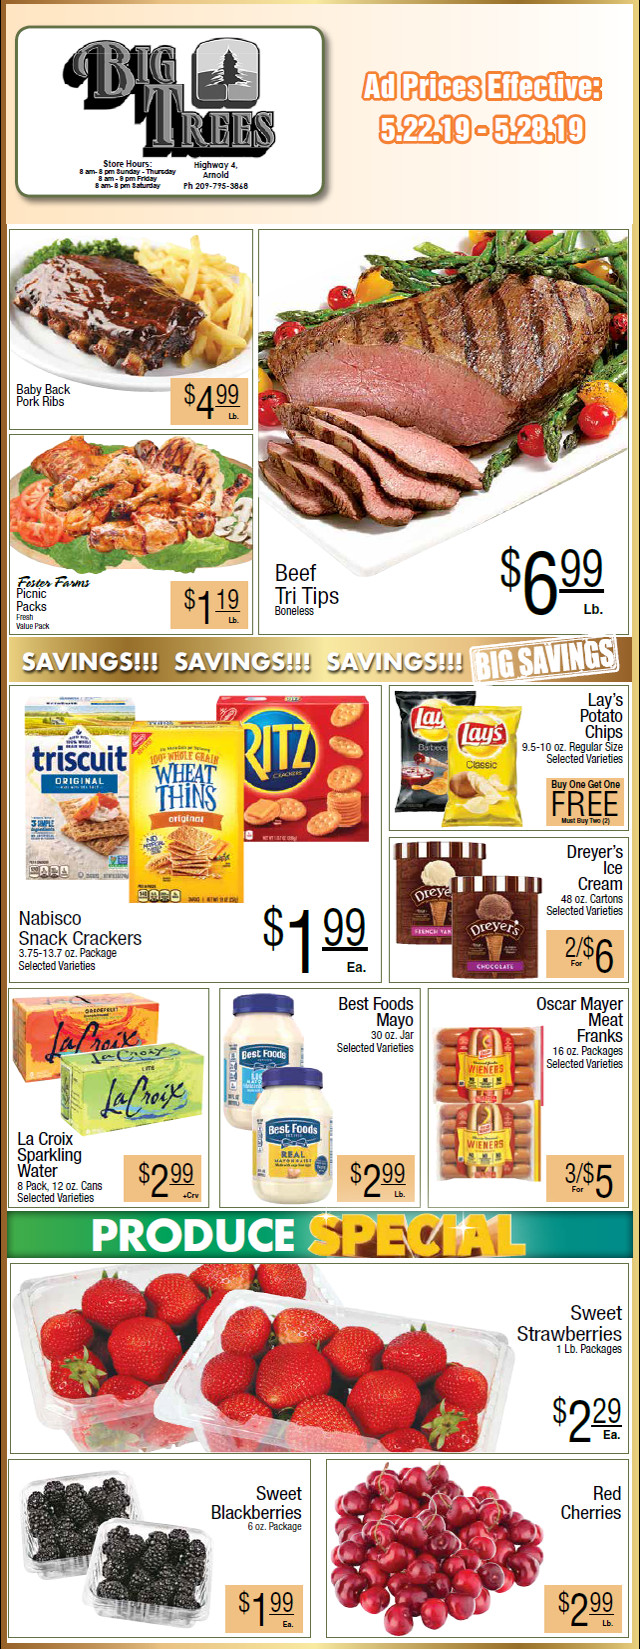 Big Trees Market Weekly Ad & Grocery Specials Through May 28th